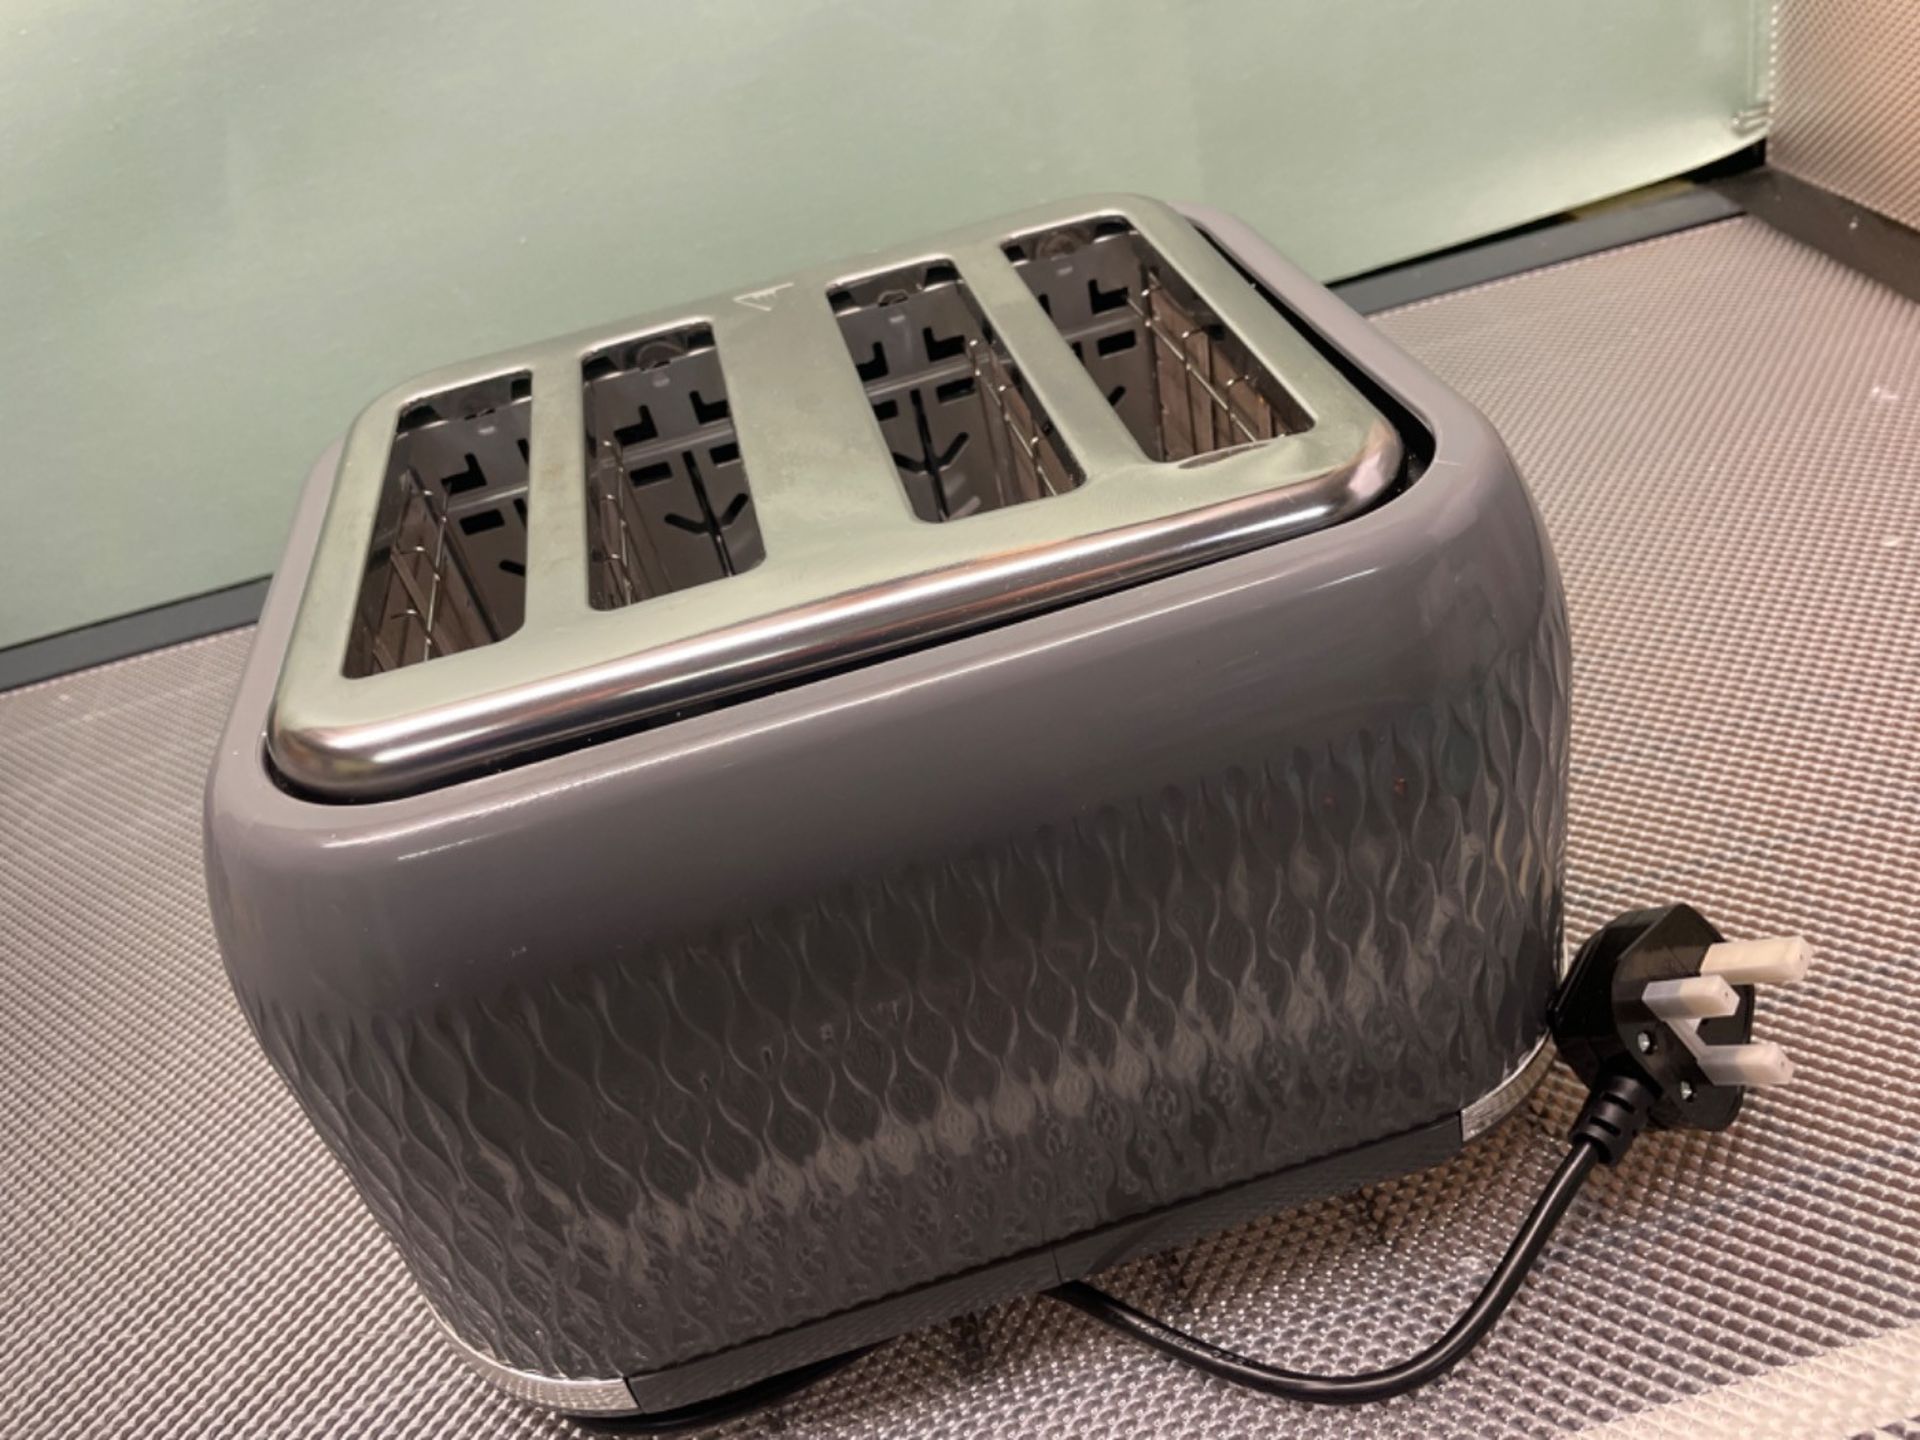 Breville Curve 4-Slice Toaster with High Lift and Wide Slots | Grey & Chrome [VTR013] - Image 2 of 3